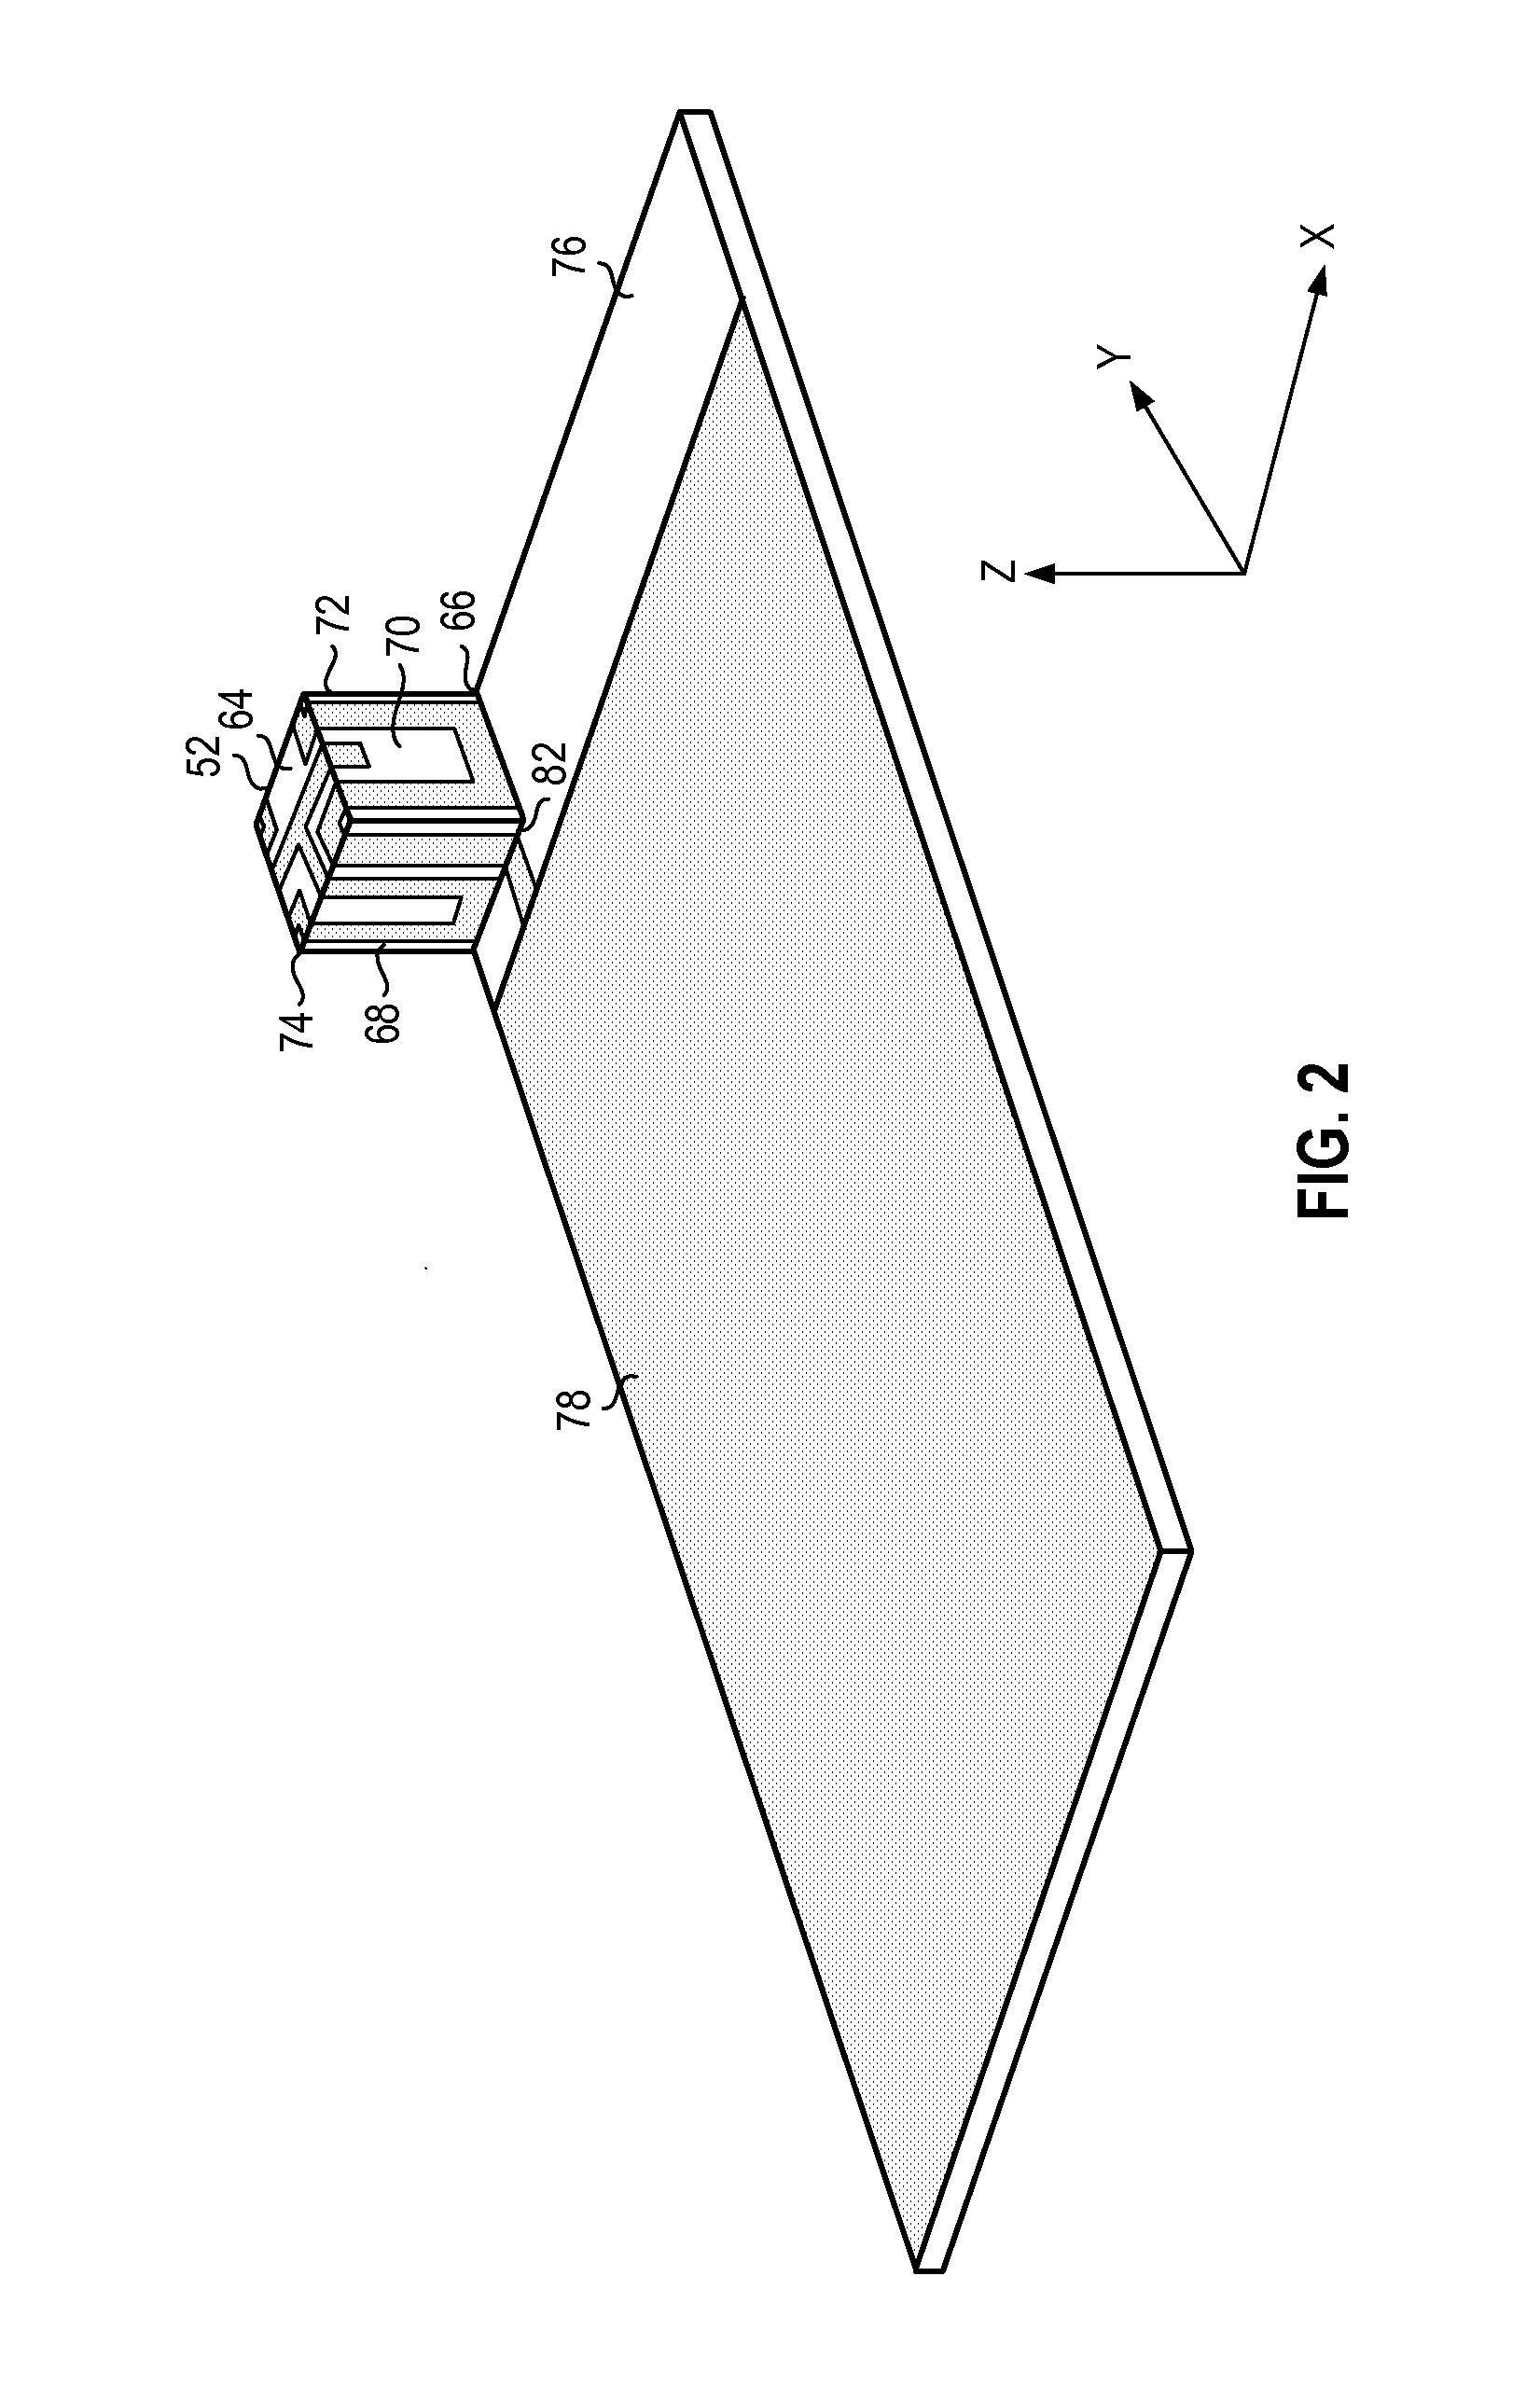 Multi-band antenna apparatus disposed on a three-dimensional substrate, and associated methodology, for a radio device